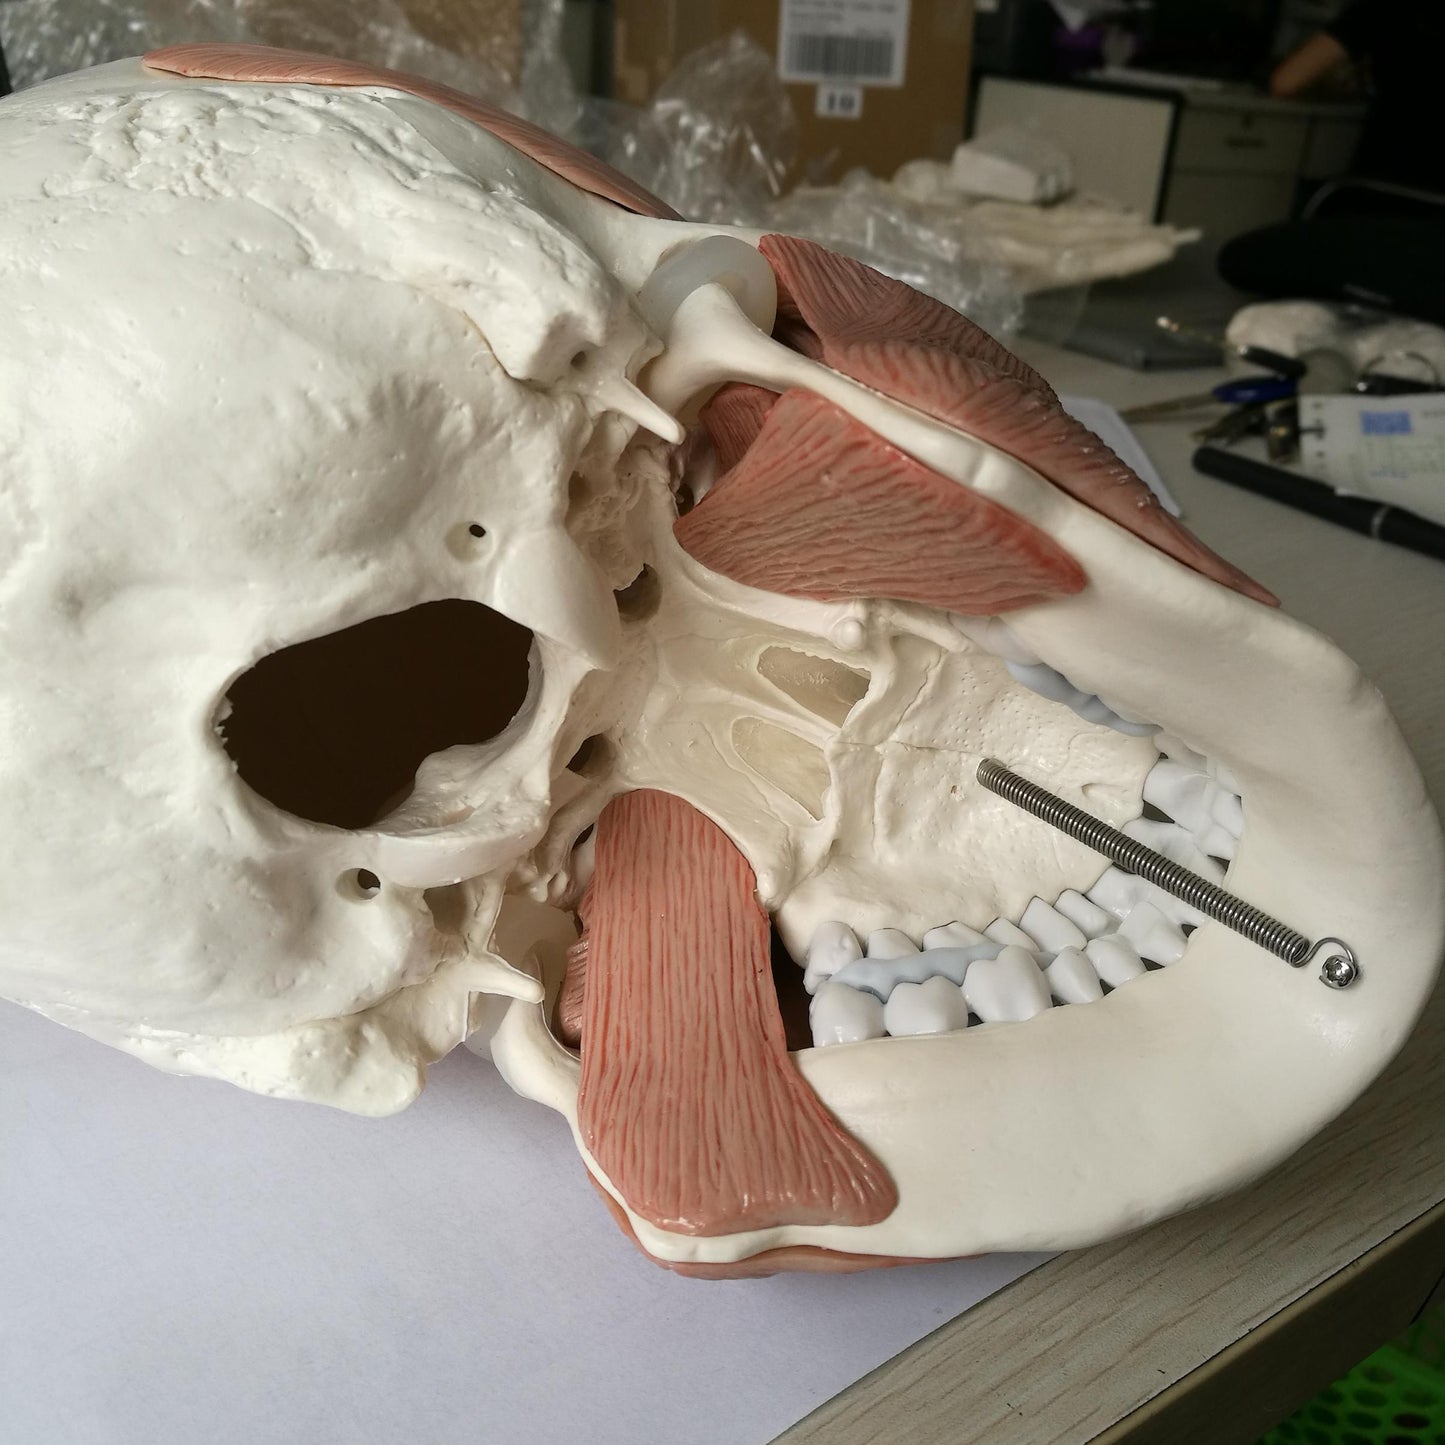 Skull model incl. all the masticatory muscles. Can be separated into 10 parts